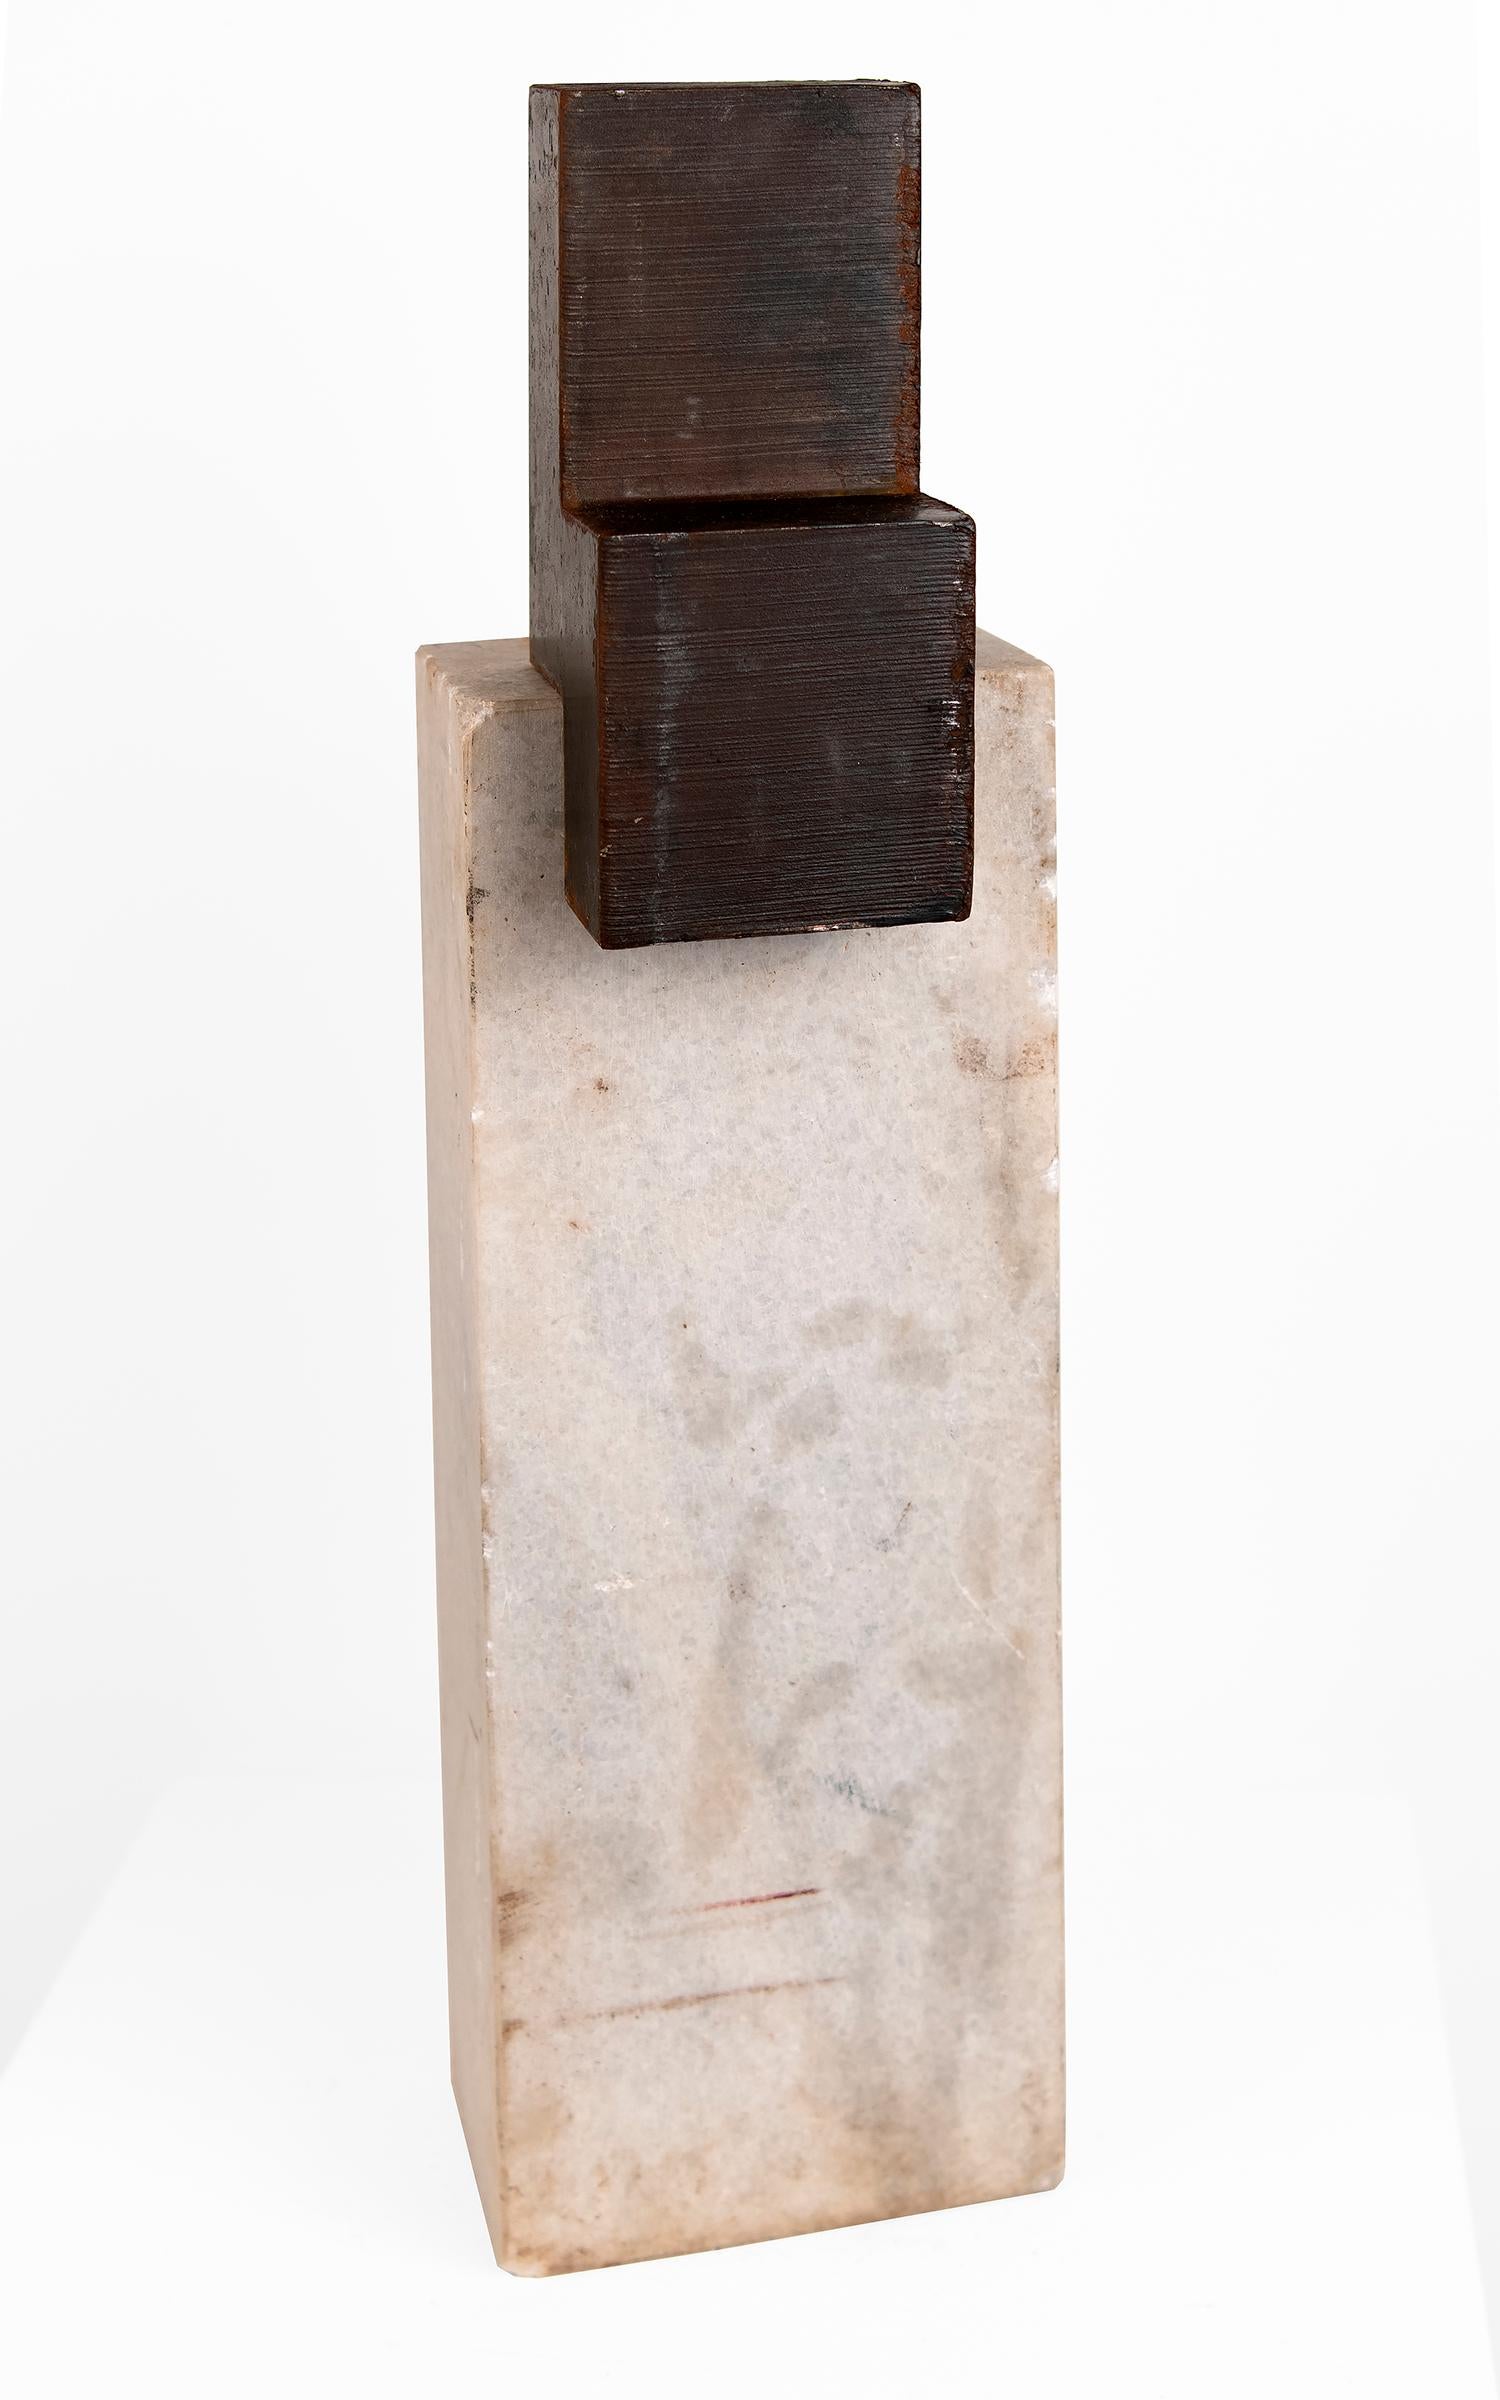 Jonathan Waters received his MFA from Yale University in 1977. While living in NYC, he was an assistant to sculptors Mark di Suvero, Charles Ginnever and Richard Serra. Waters has exhibited extensively throughout the Northeast. Recent large- scale